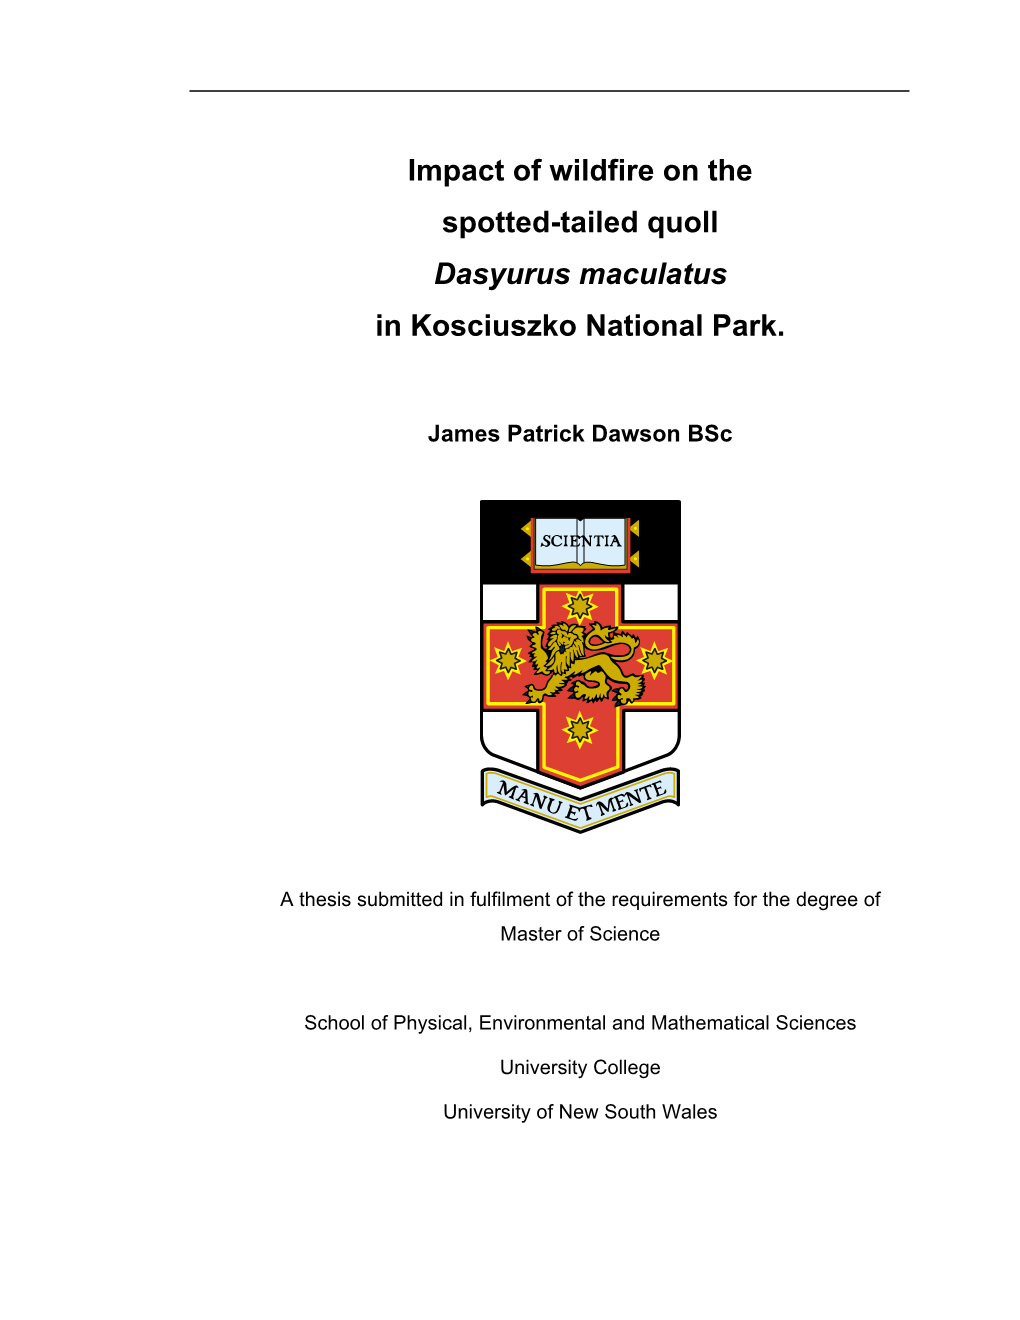 Impact of Wildfire on the Spotted-Tailed Quoll Dasyurus Maculatus in Kosciuszko National Park